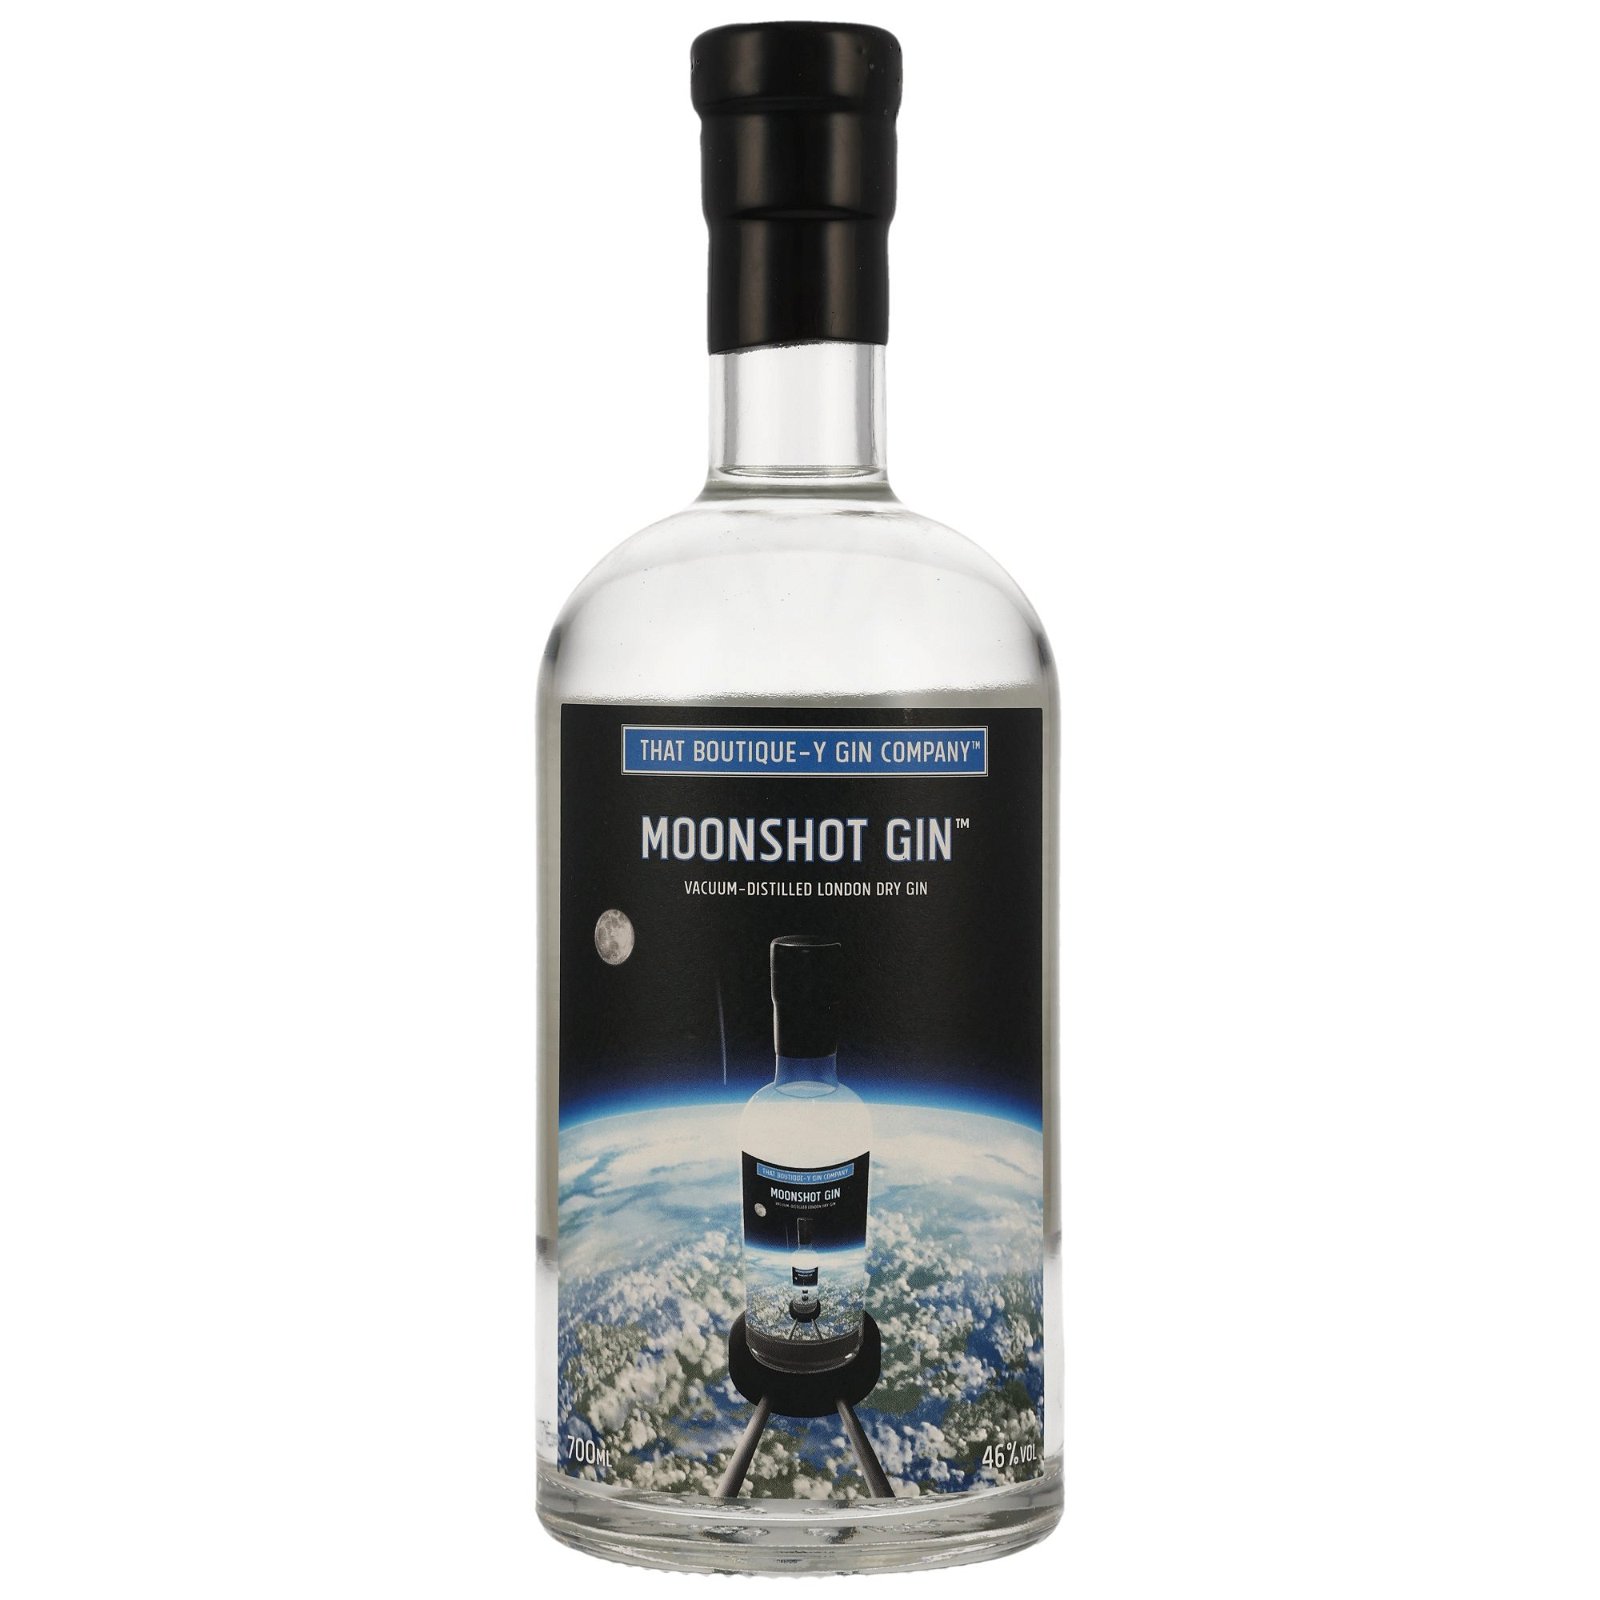 Moonshot Gin (That Boutique-y Gin Company)